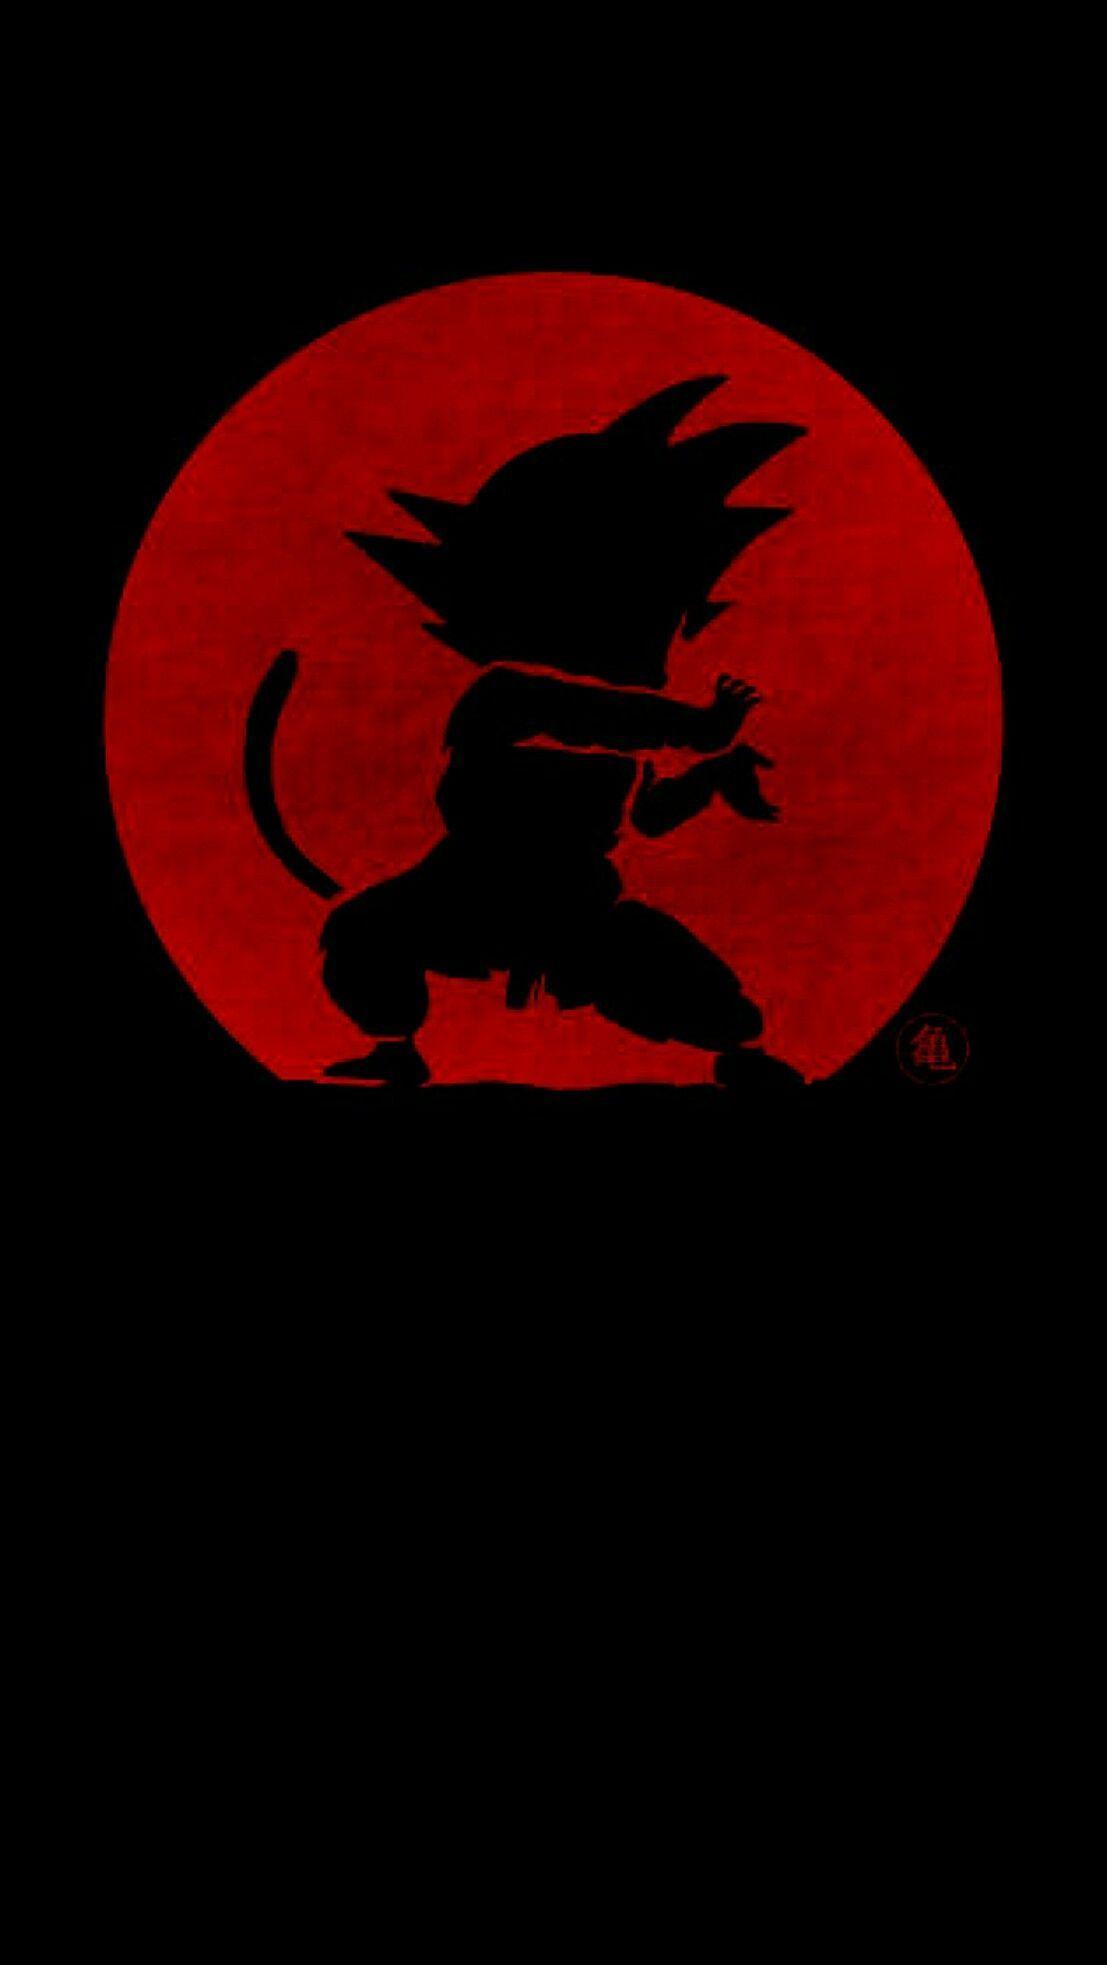 anime #dbz #black #wallpaper #android #iphone. Dragon ball art, Dragon ball wallpaper, Dragon ball